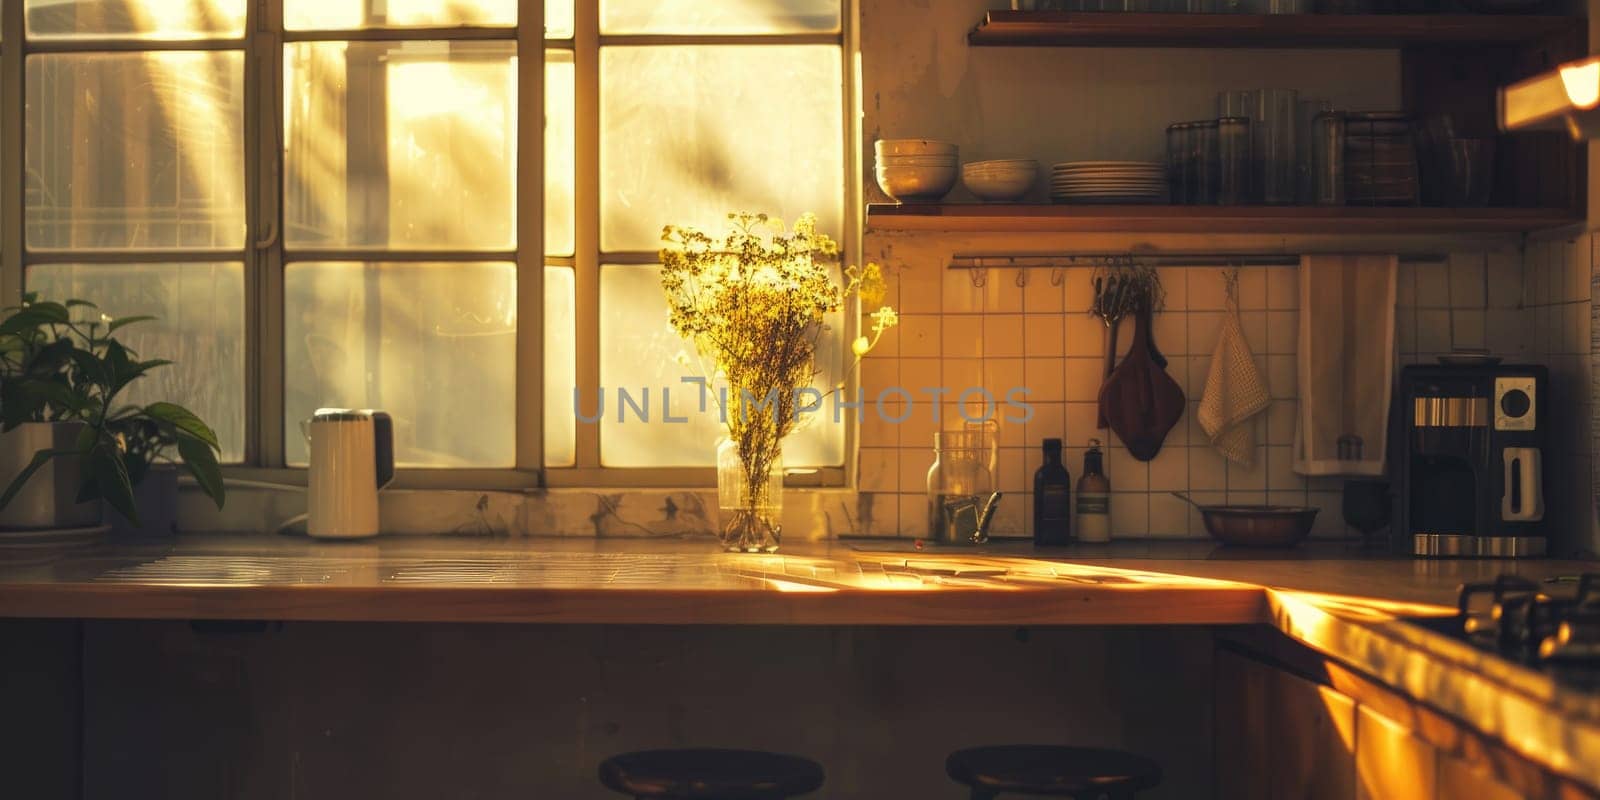 A kitchen with a window and a vase of flowers on the counter. The sunlight is shining through the window, creating a warm and inviting atmosphere